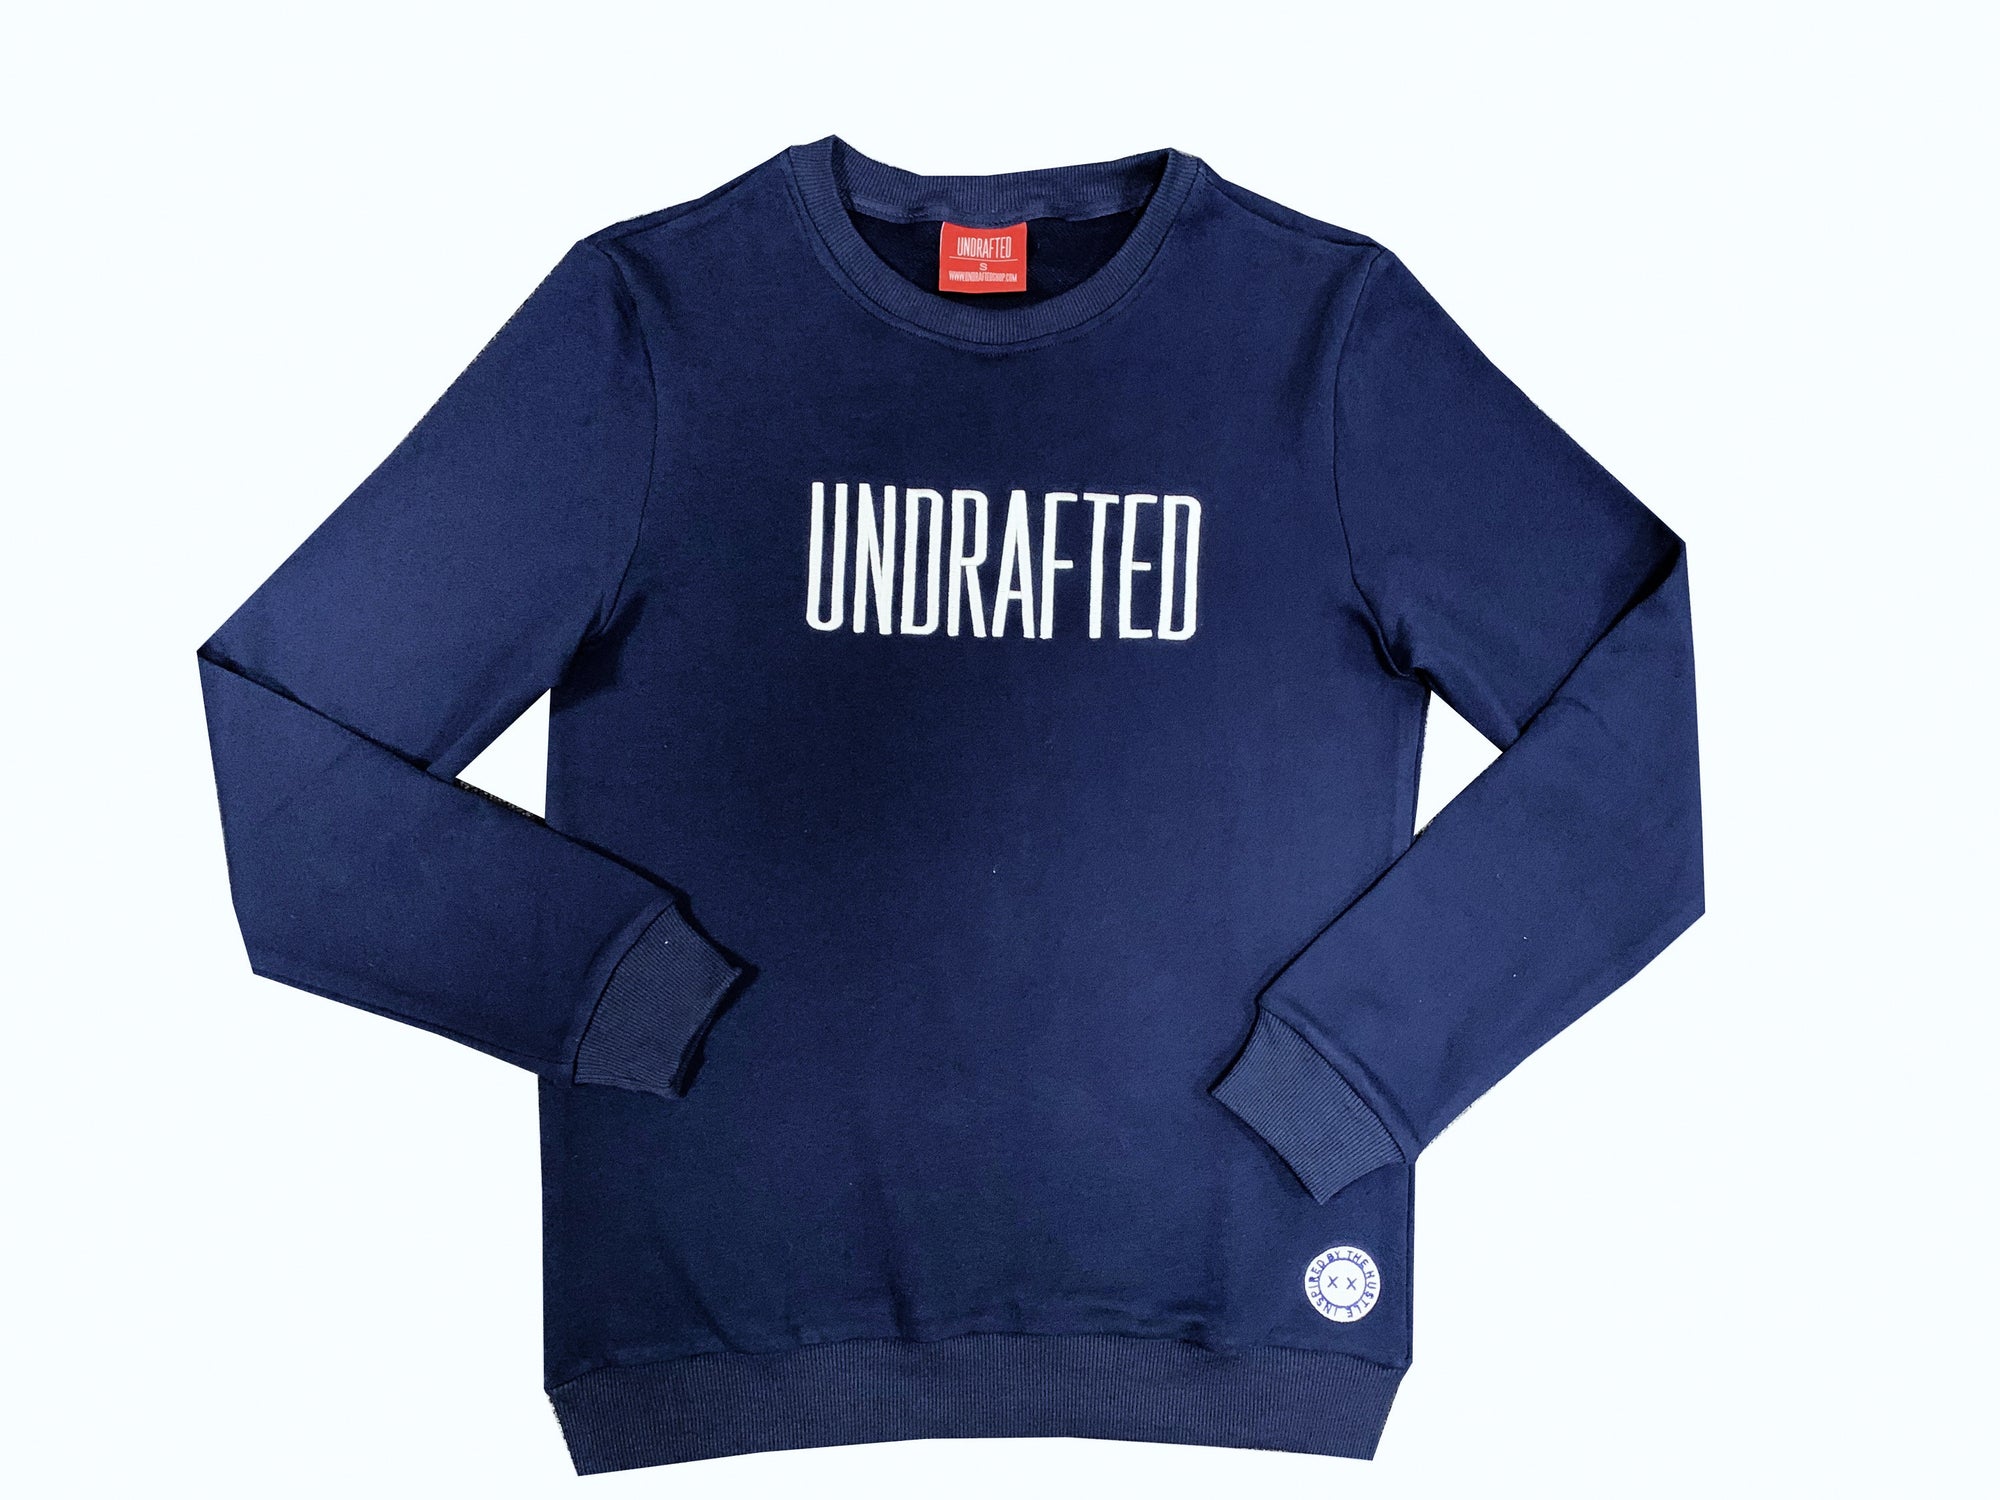 Embroidered Undrafted Sweatshirt Navy Blue/White